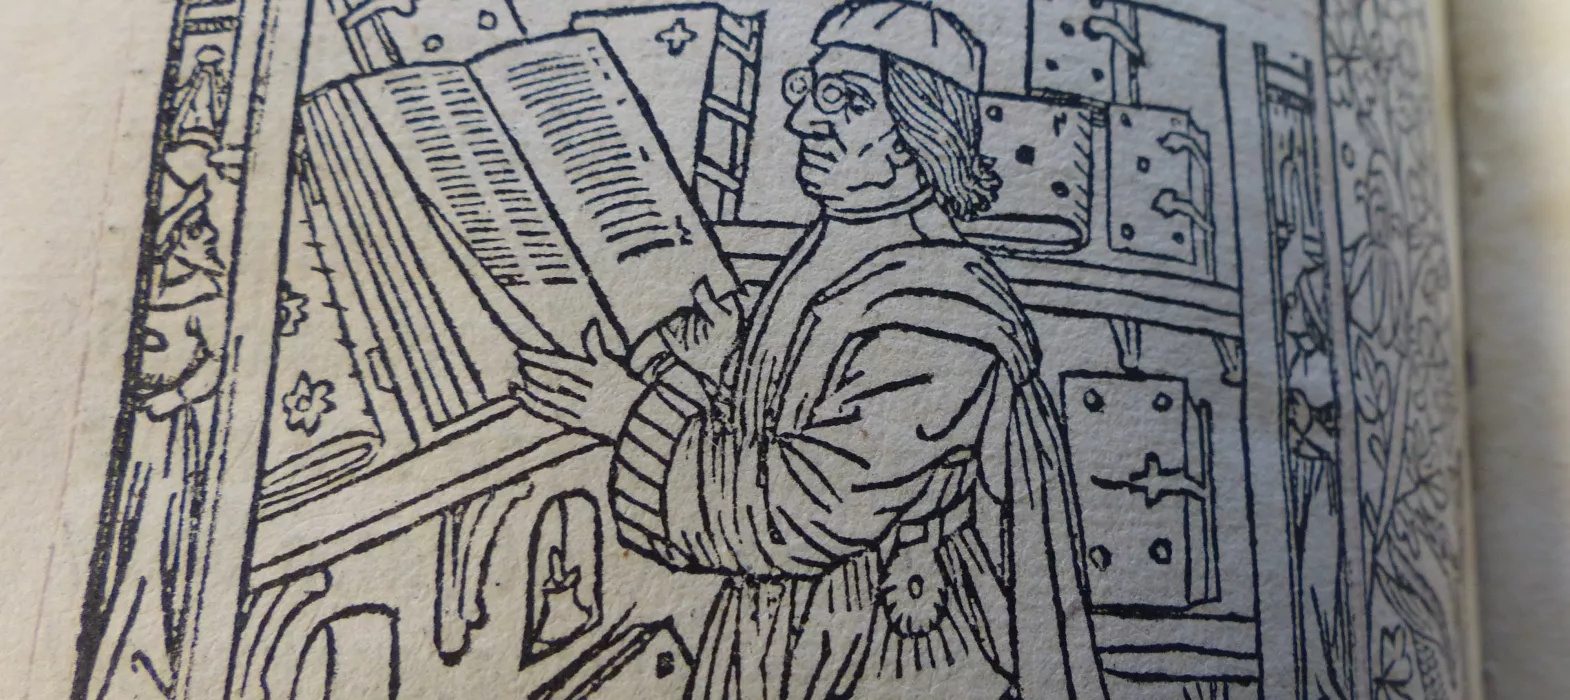 La mer des histoires, New College Library, Oxford, BT1.47.1 - scholar wearing spectacles standing at his desk